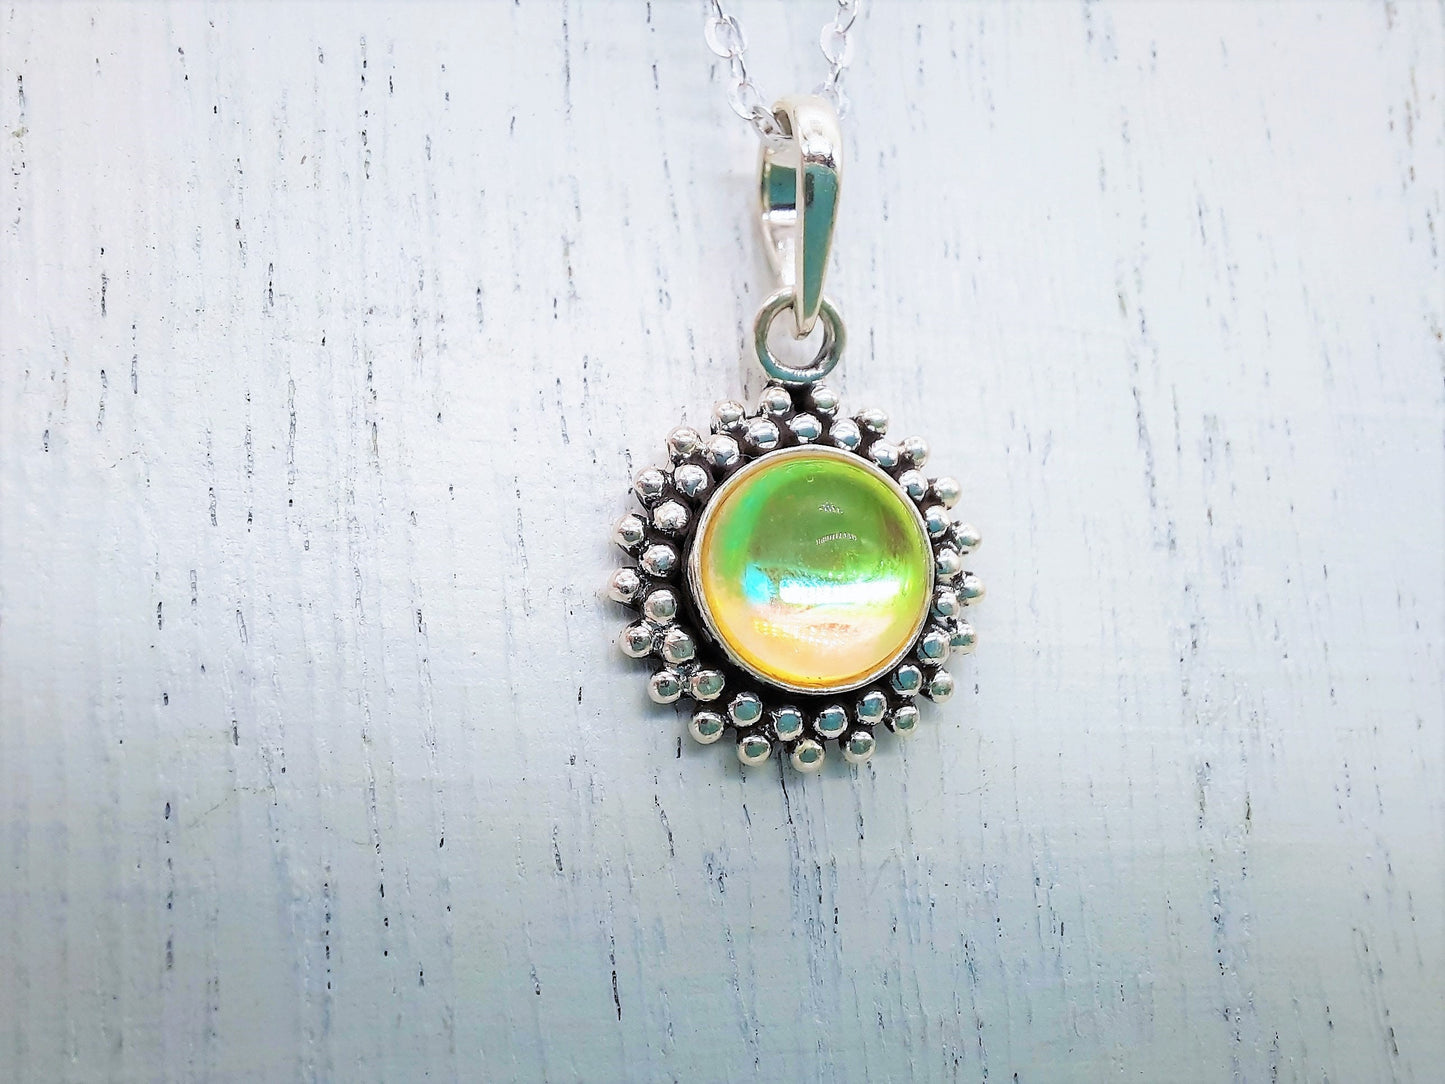 Antiqued Double Sunburst Design 925 Sterling Silver Pendant Necklace with 8mm Translucent Mirror Ball Yellow Glass Cabochon Setting